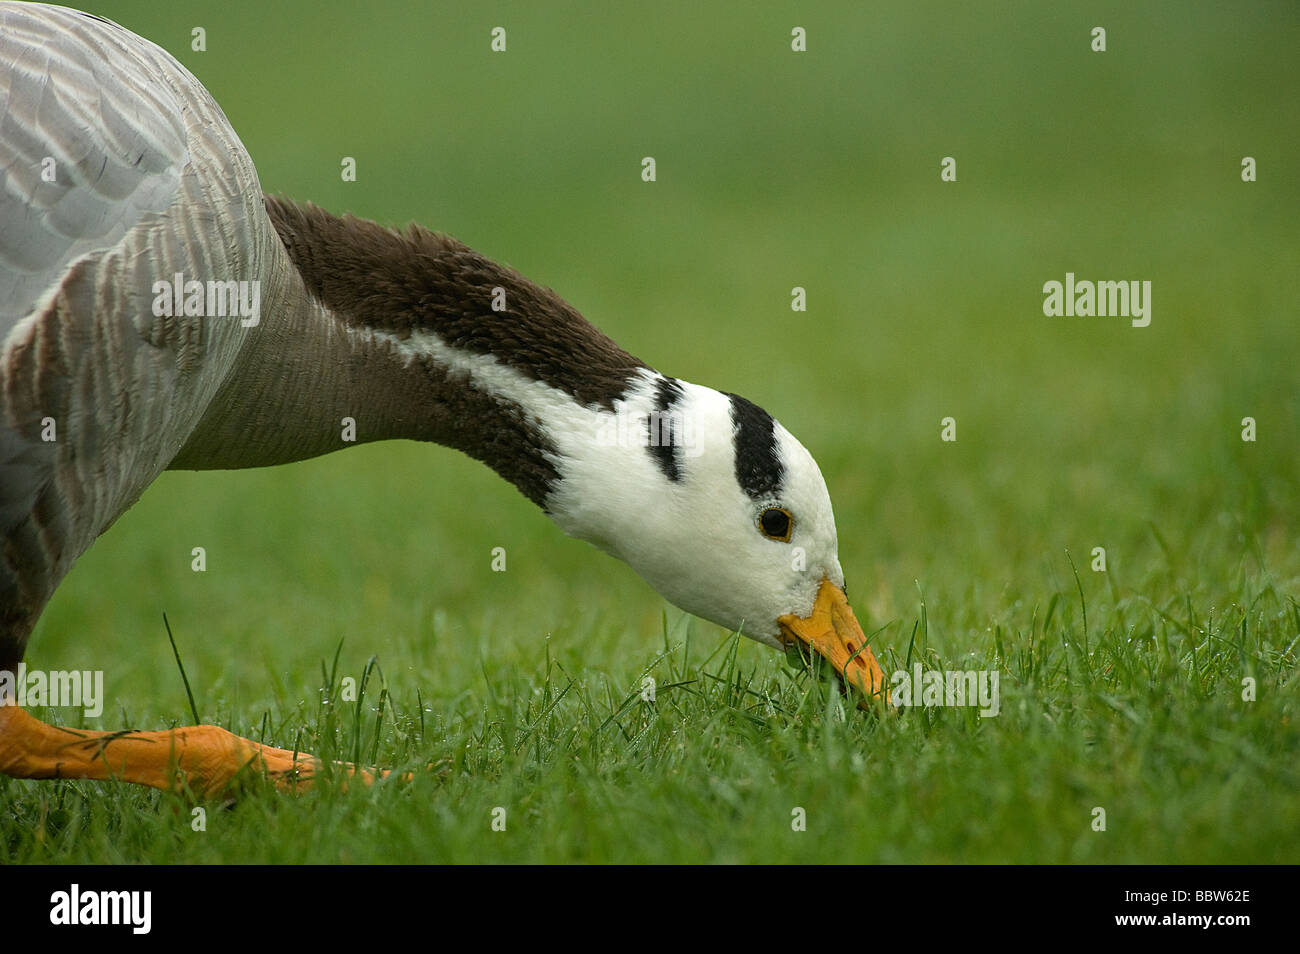 Bar headed goose Anser indicus grazing on grass with dew Stock Photo